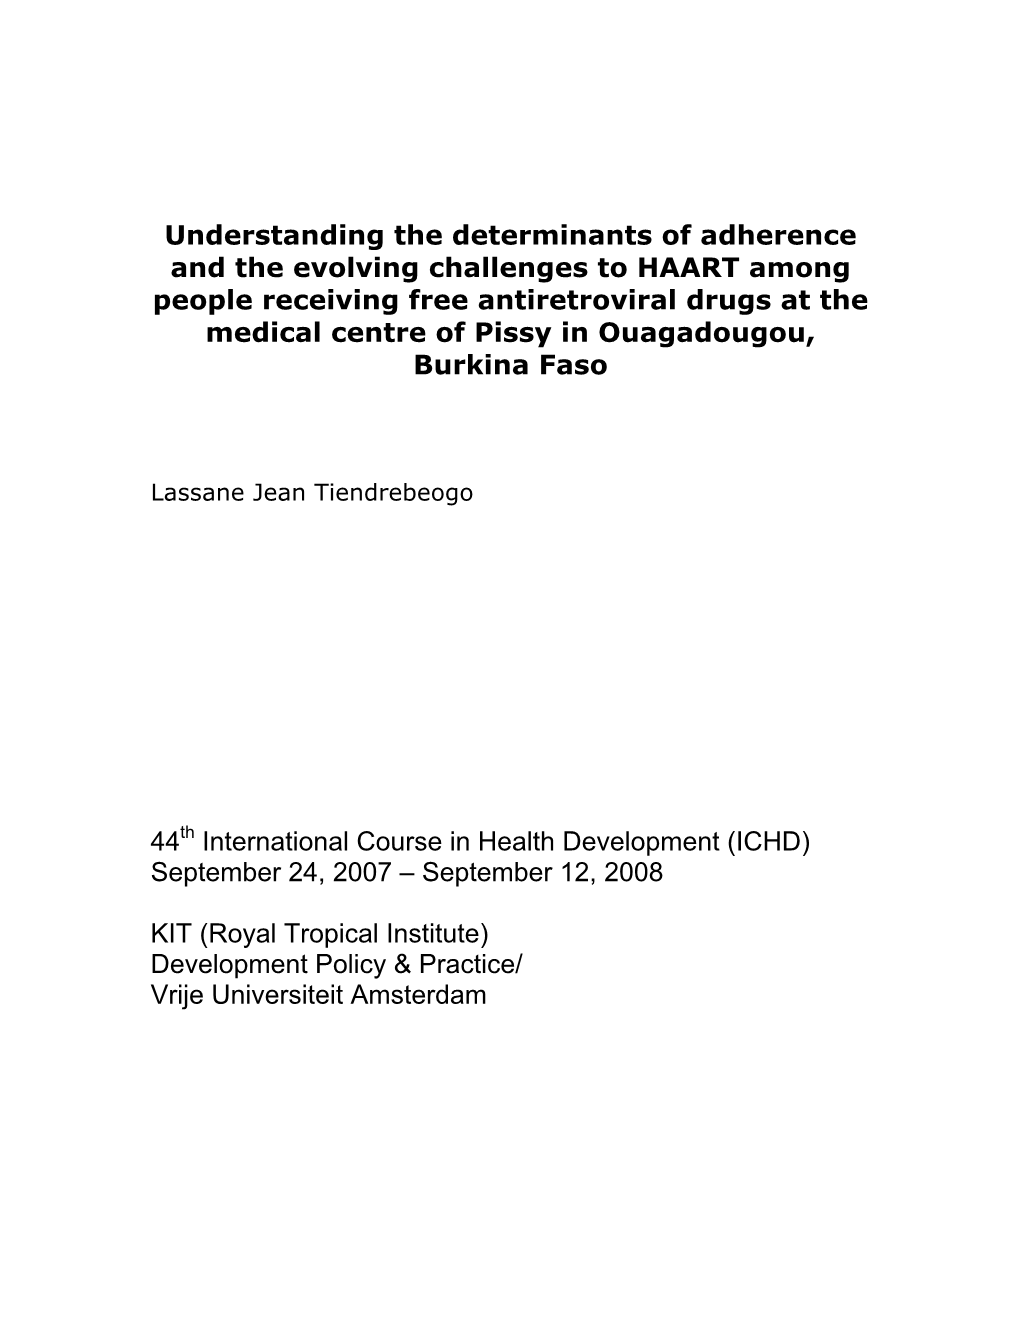 Understanding the Determinants of Adherence and the Evolving